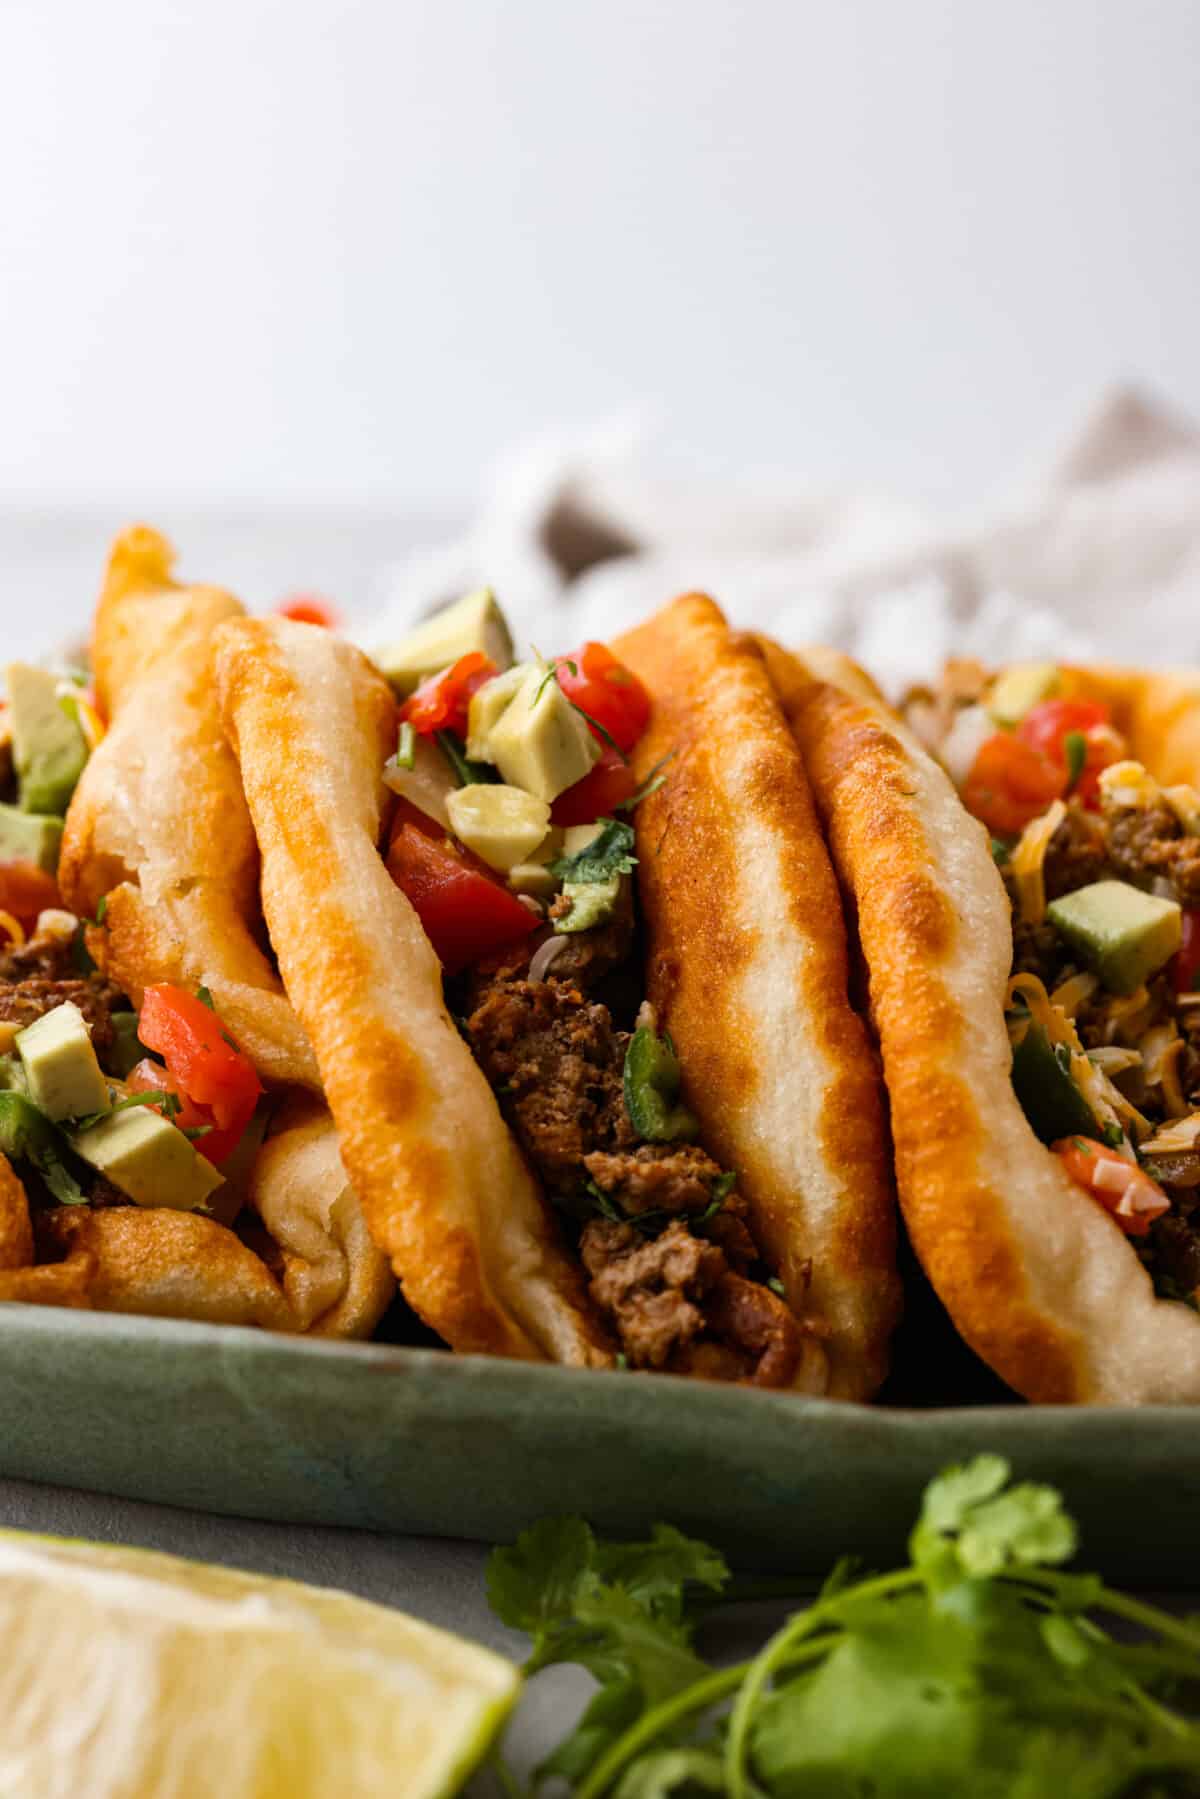 Closeup of 3 chalupas filled with beef and vegetables.